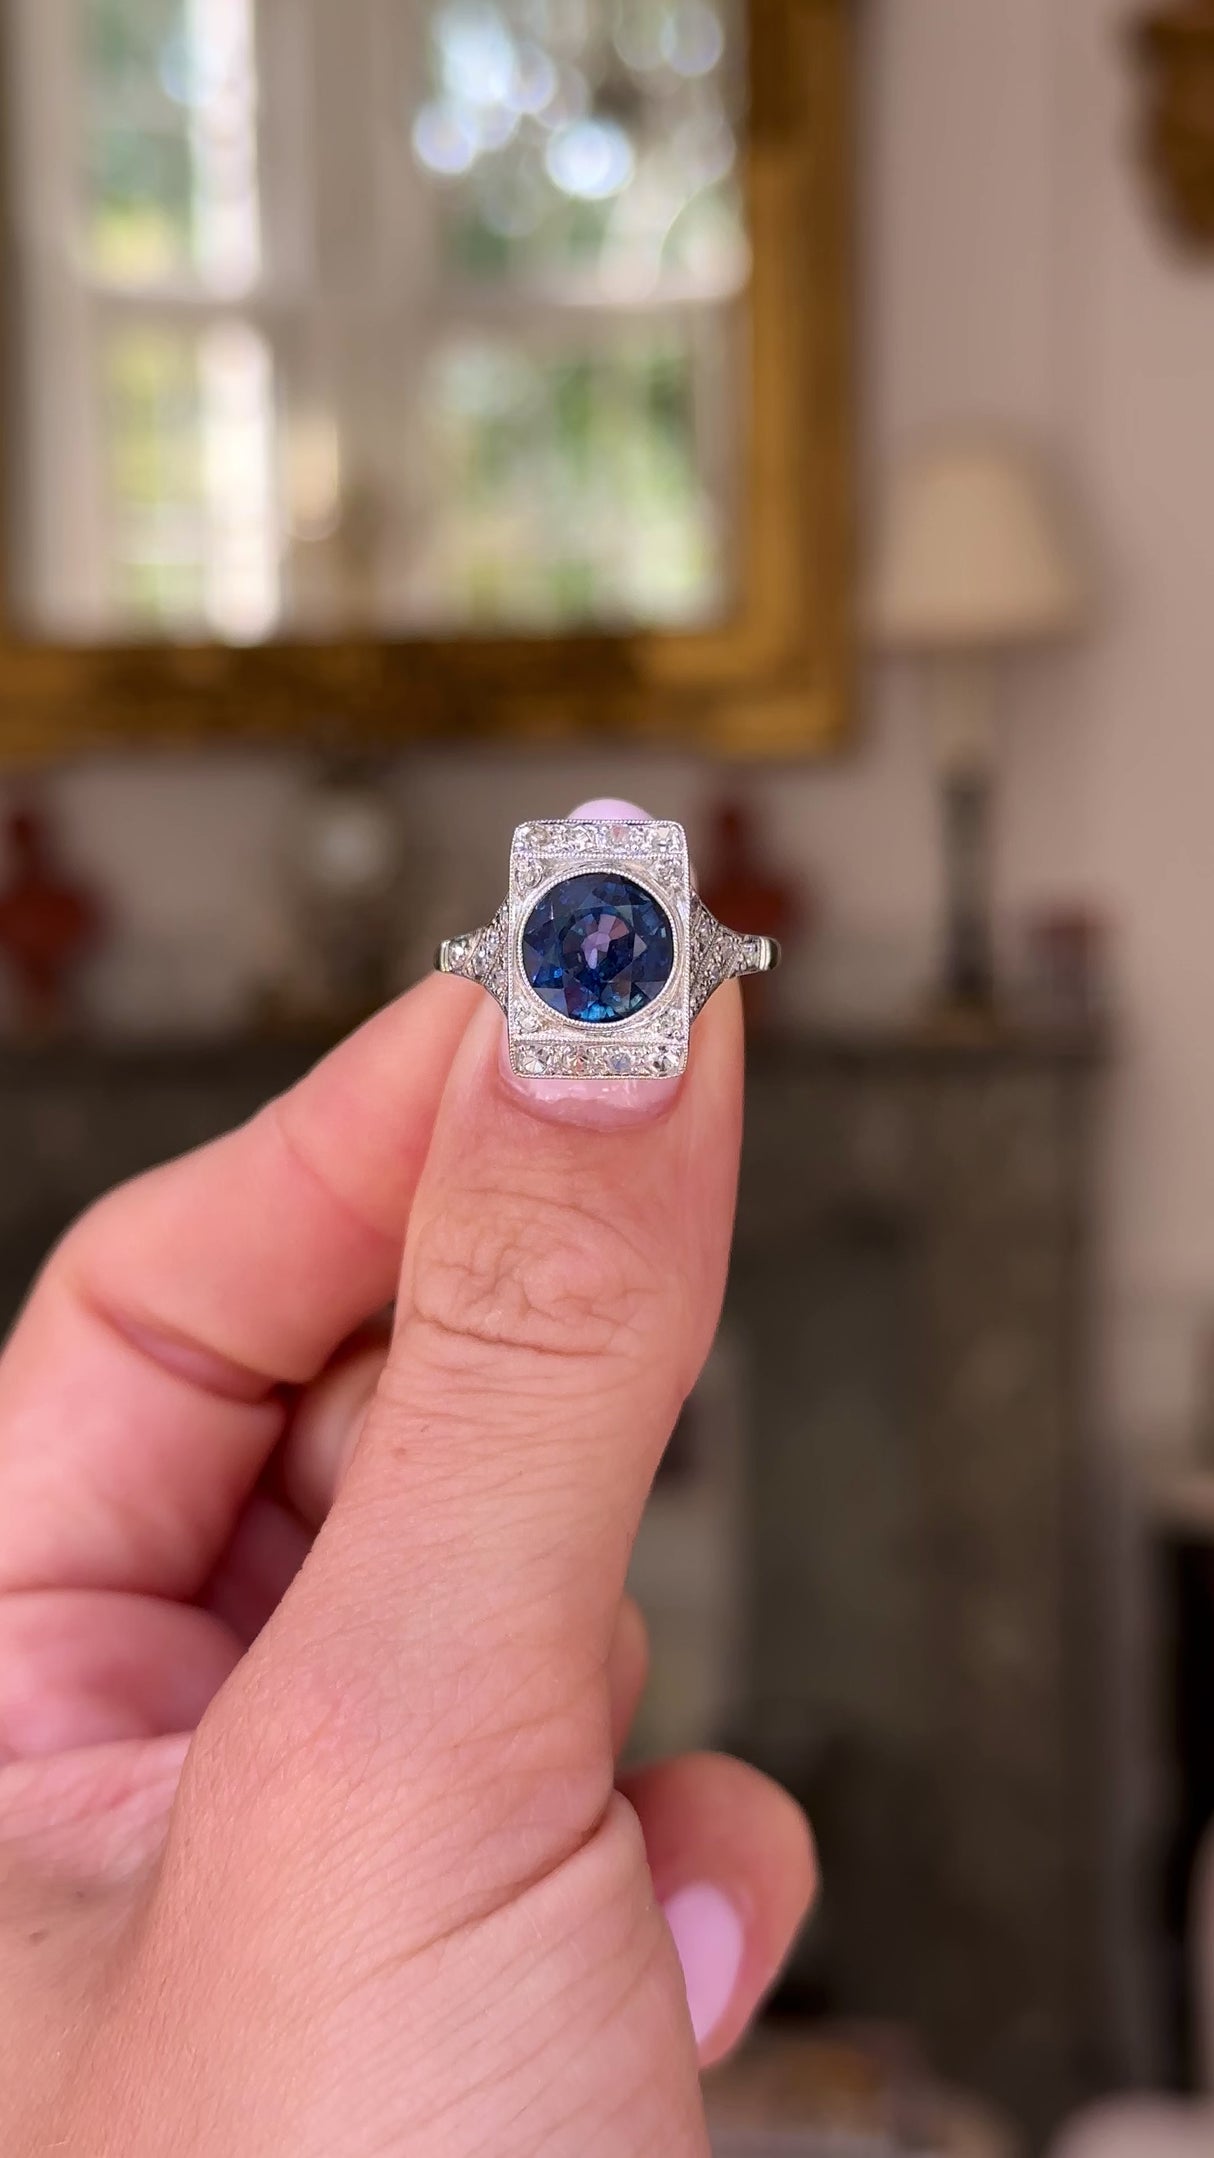 sapphire and diamond panel ring held in fingers and moved around to give perspective.